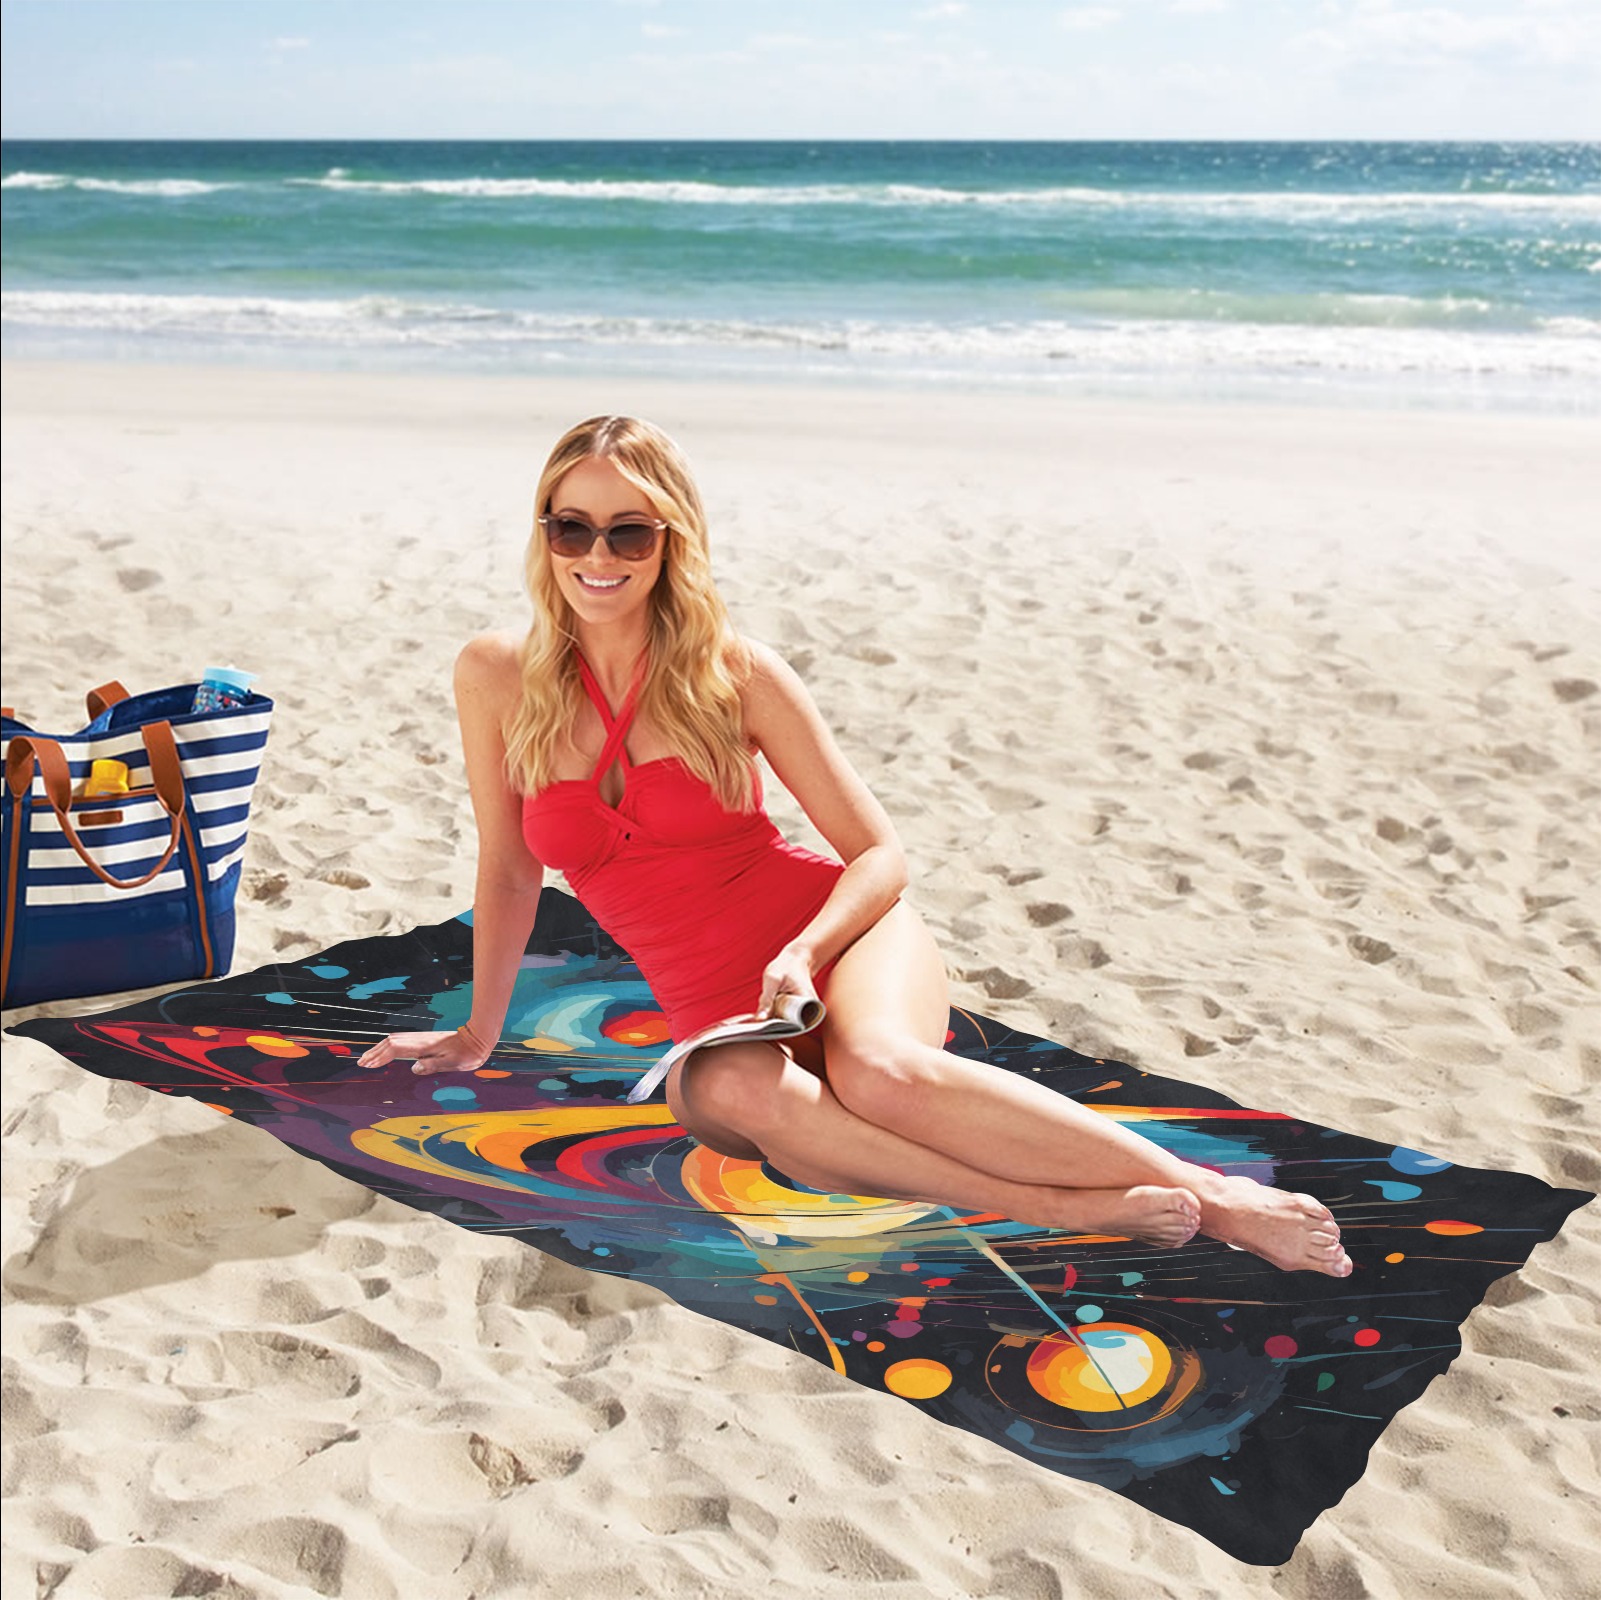 Galactical shapes, planets, stars in black space Beach Towel 32"x 71"